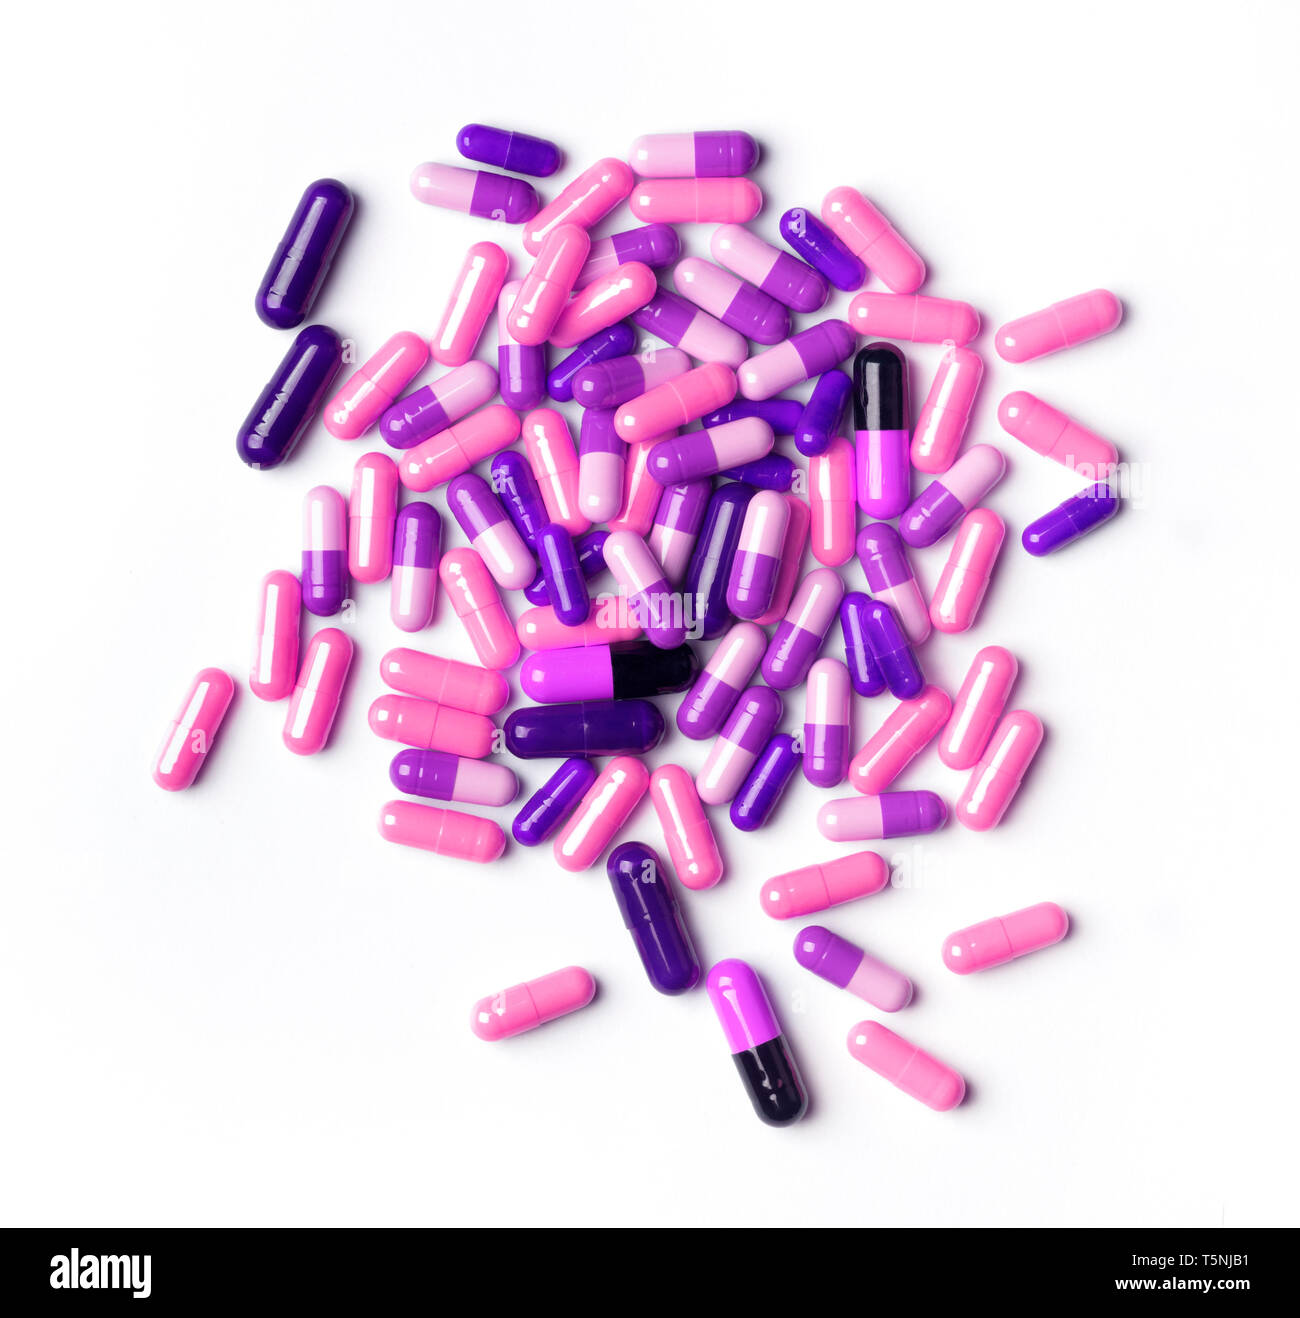 Top view of pile of color pink pills against white background. Medicine abuse concept Stock Photo